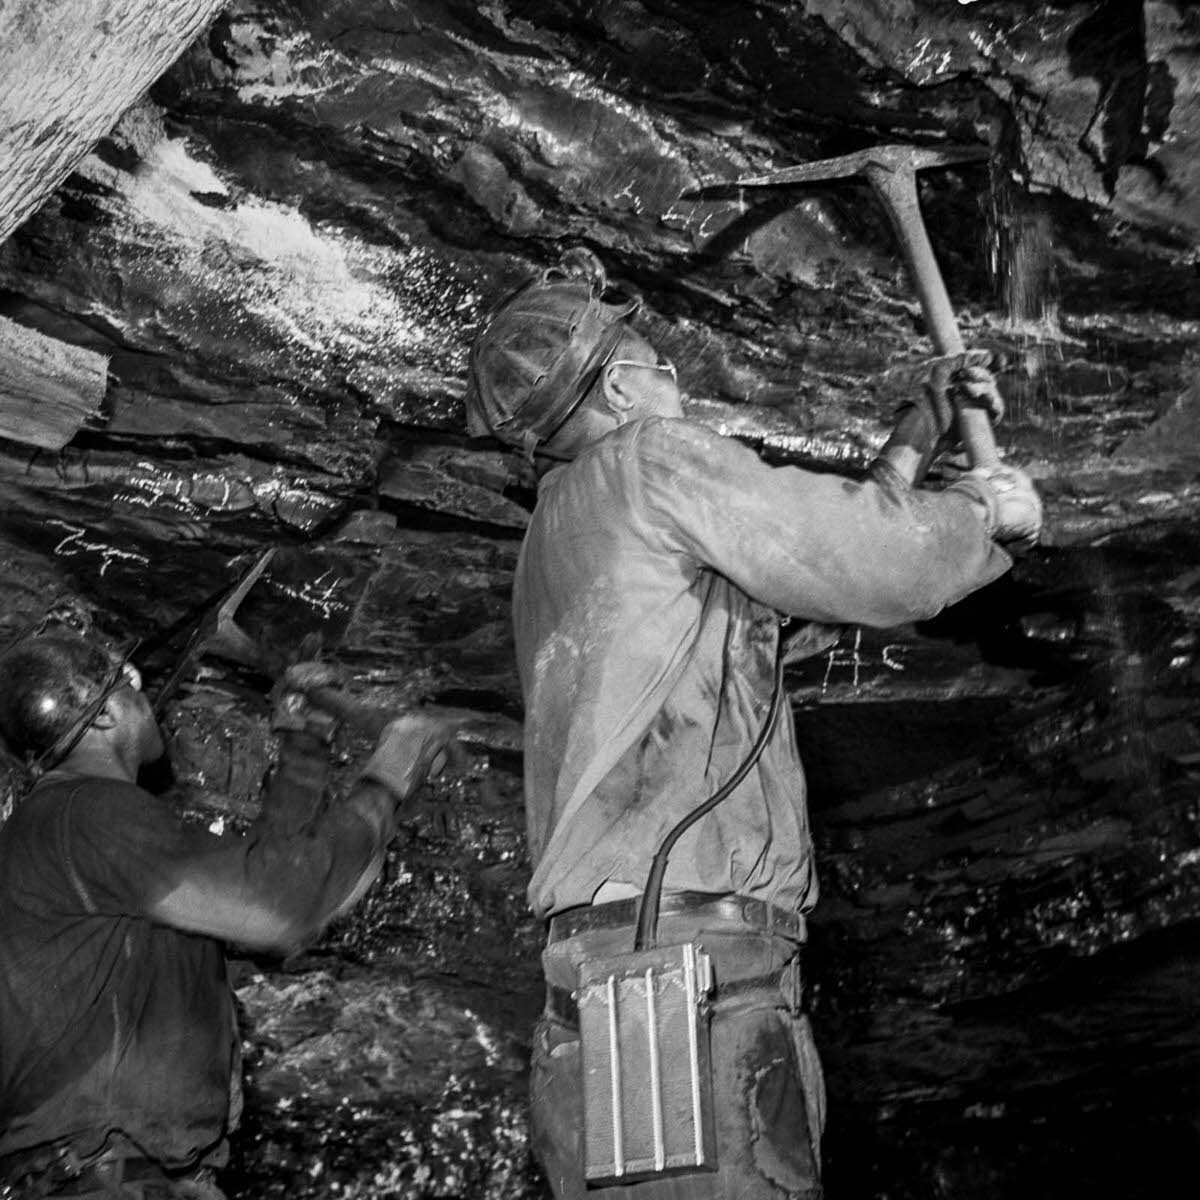 Miners pull down an unstable roof.